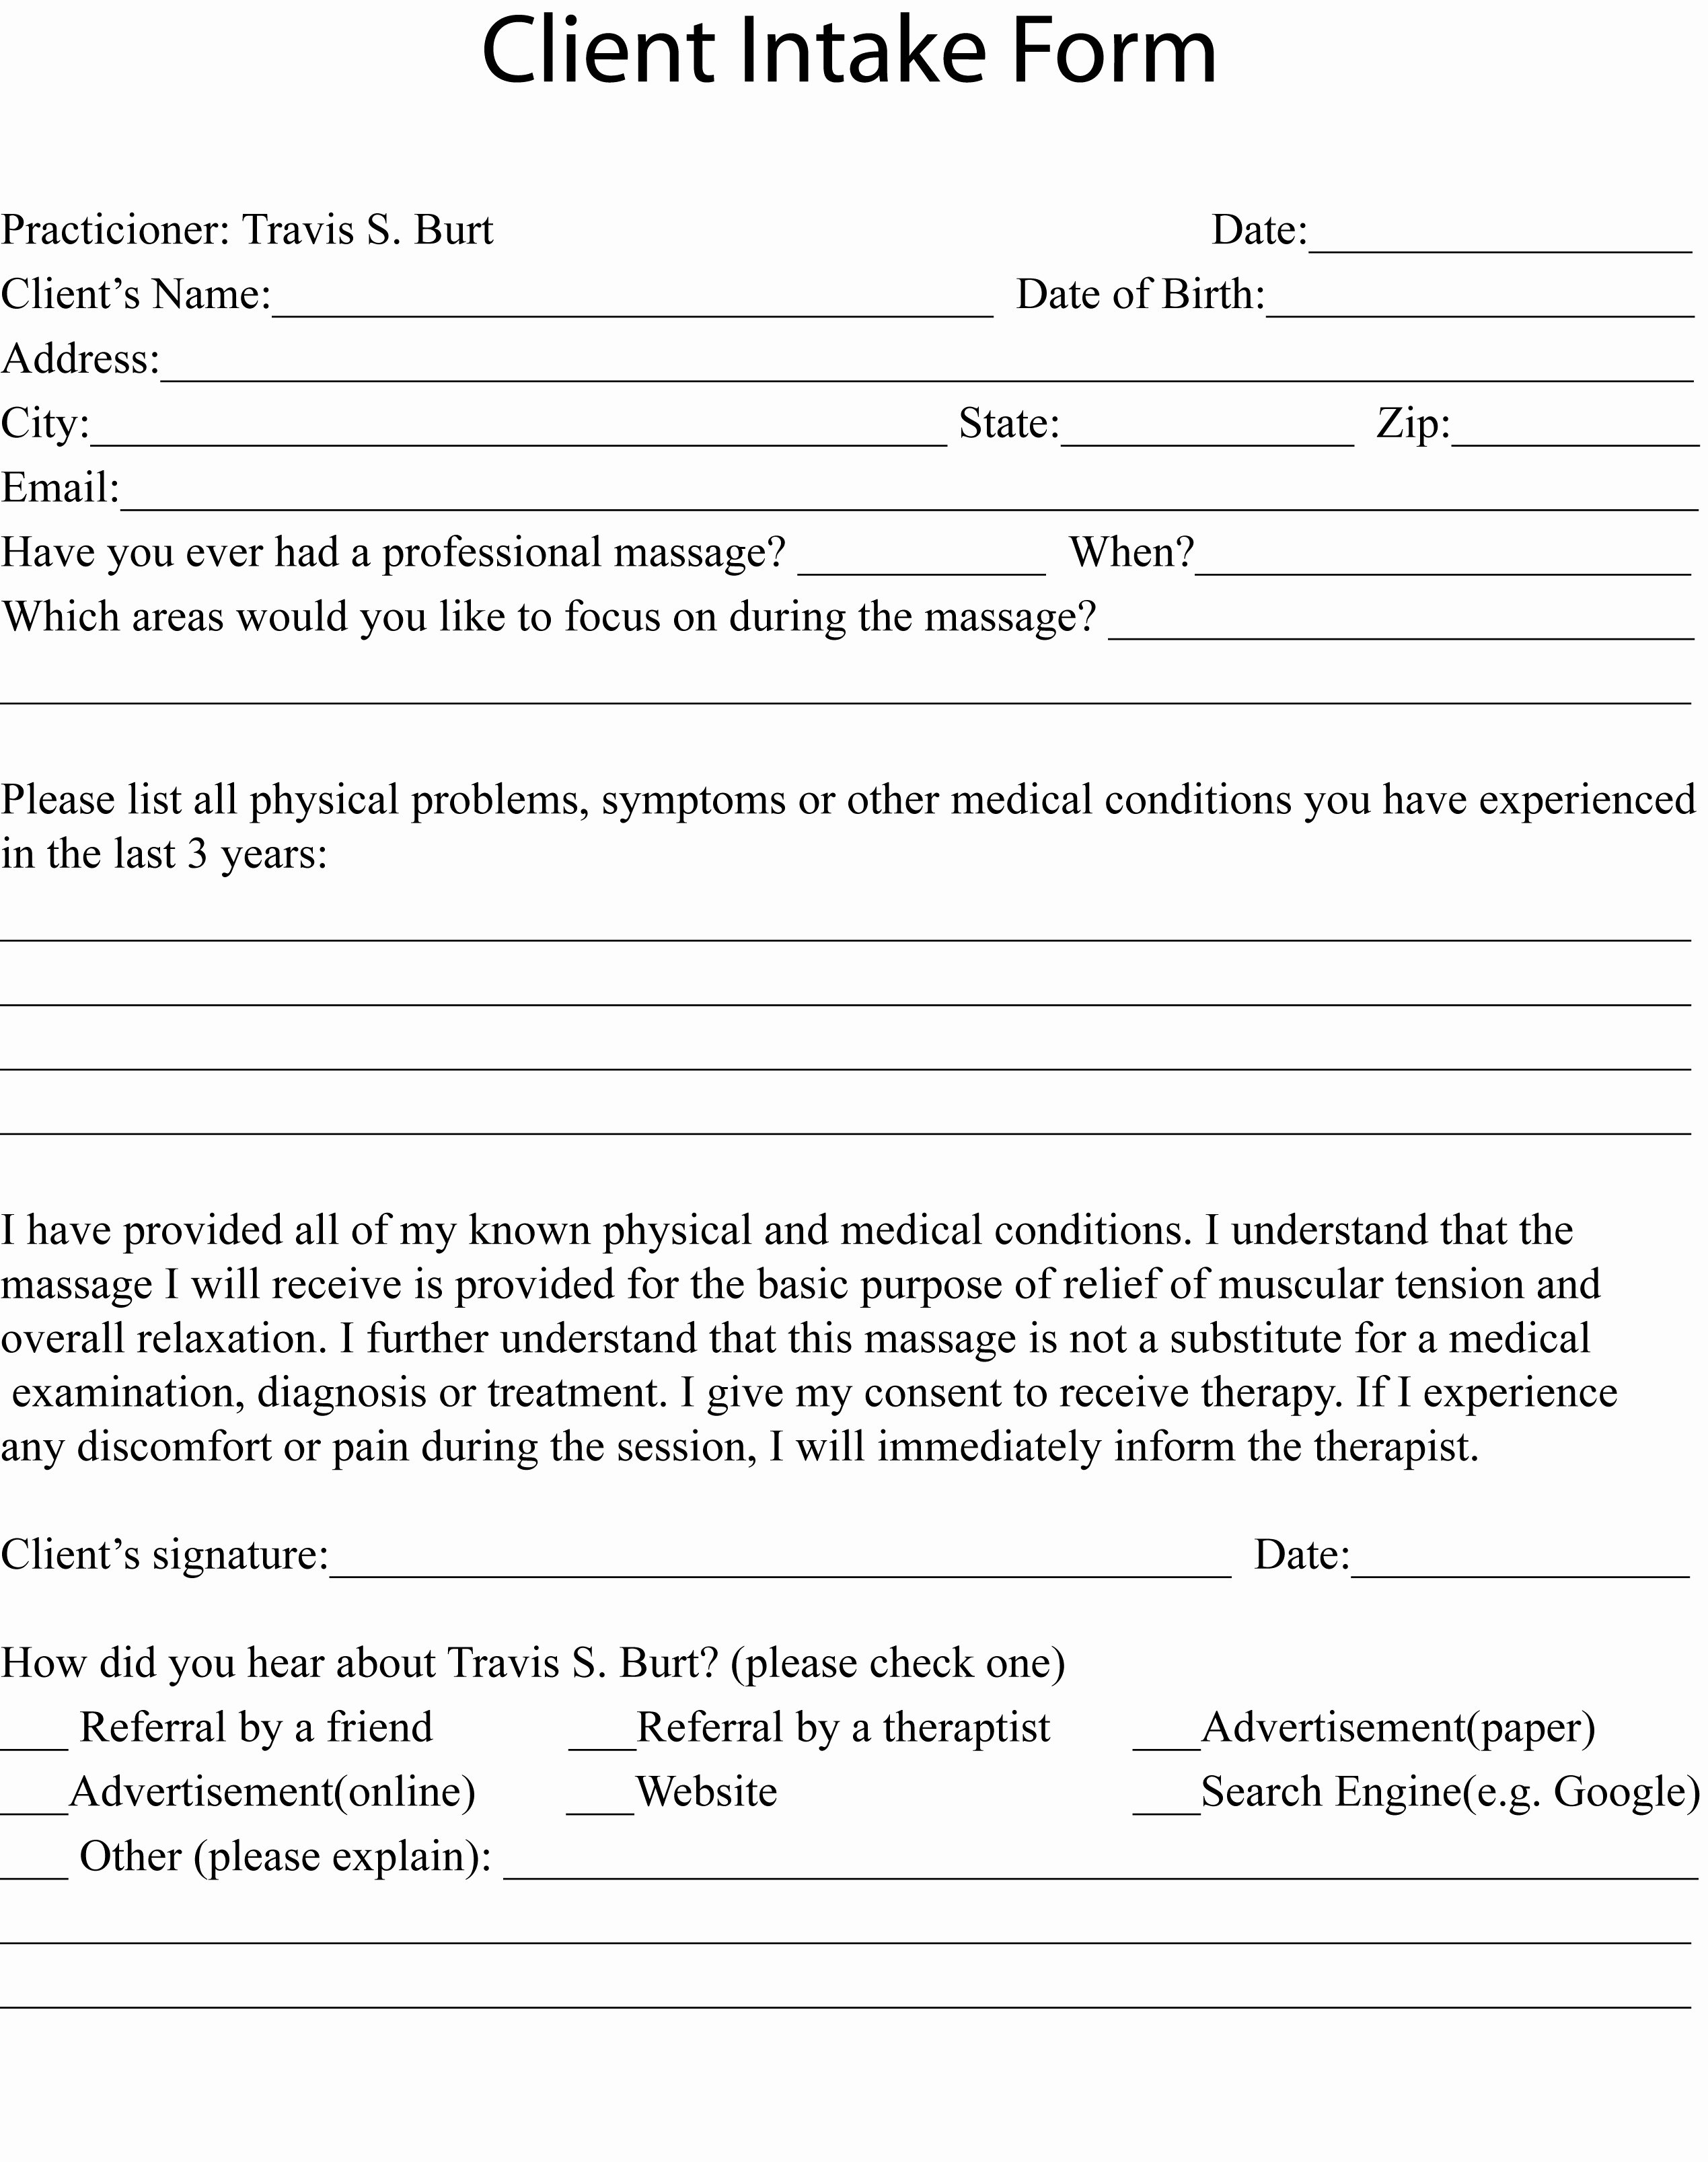 Client Intake form Template Download Templates Data